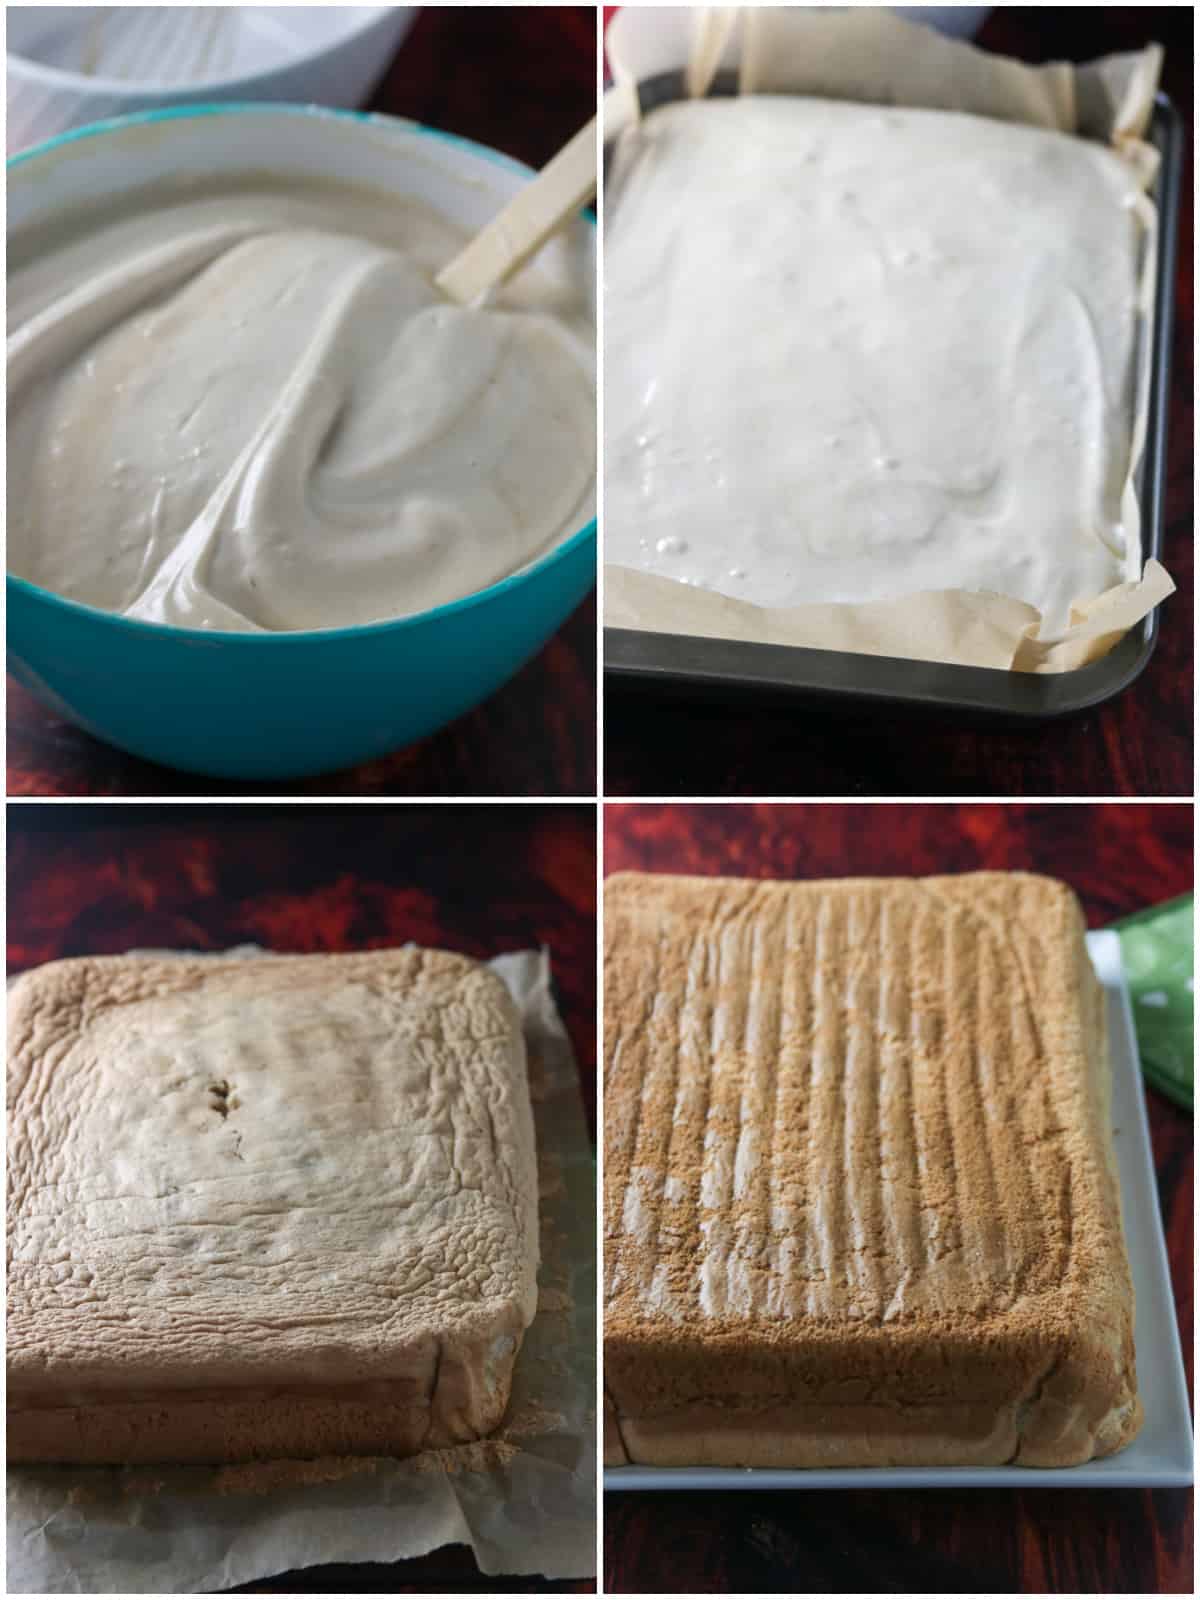 A collage showing the mixing stage of the mocha cake batter, then pouring it into a baking pan.